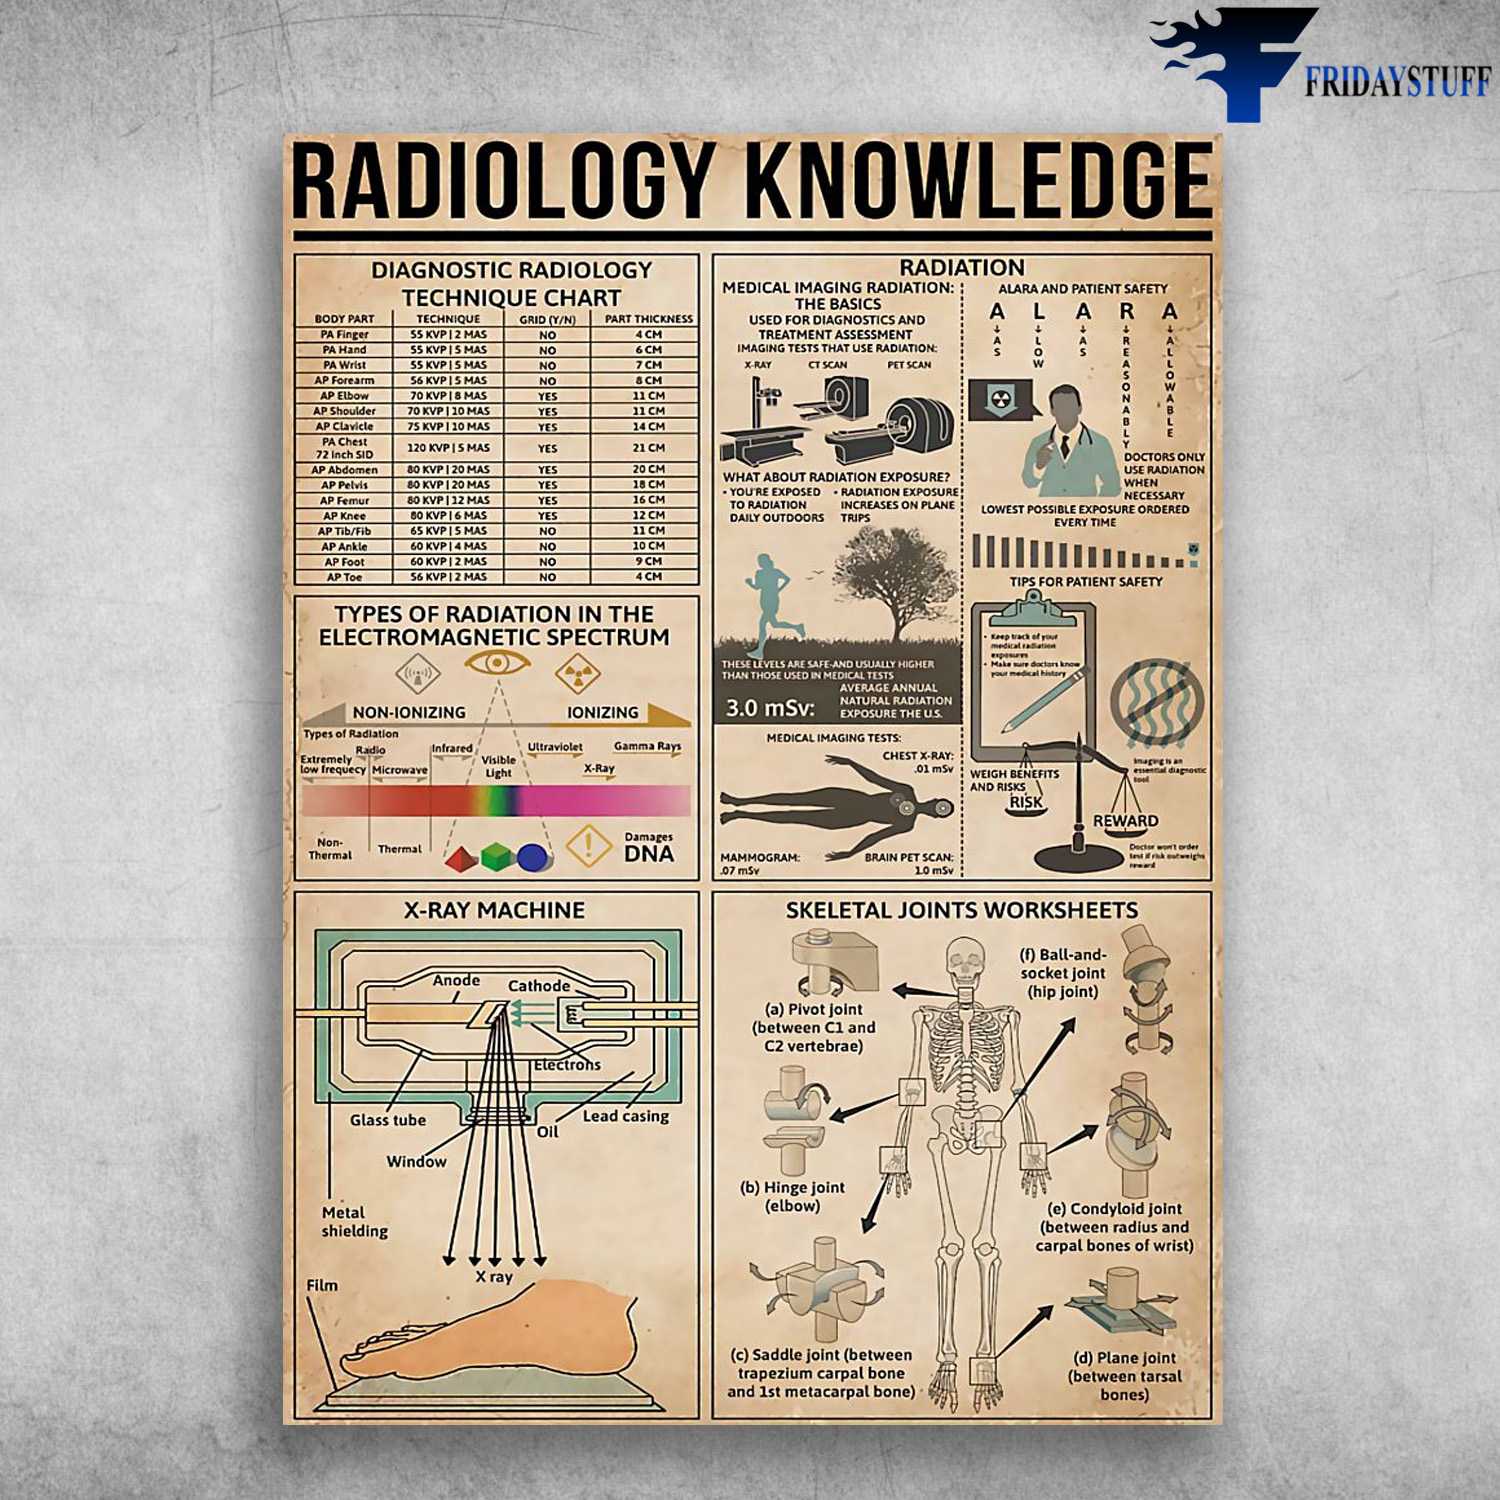 Radiology Knowledge, Diagnostic Radiology Technique Chart, Radiation, X-Ray Machine, Skeletal Joints Worksheets